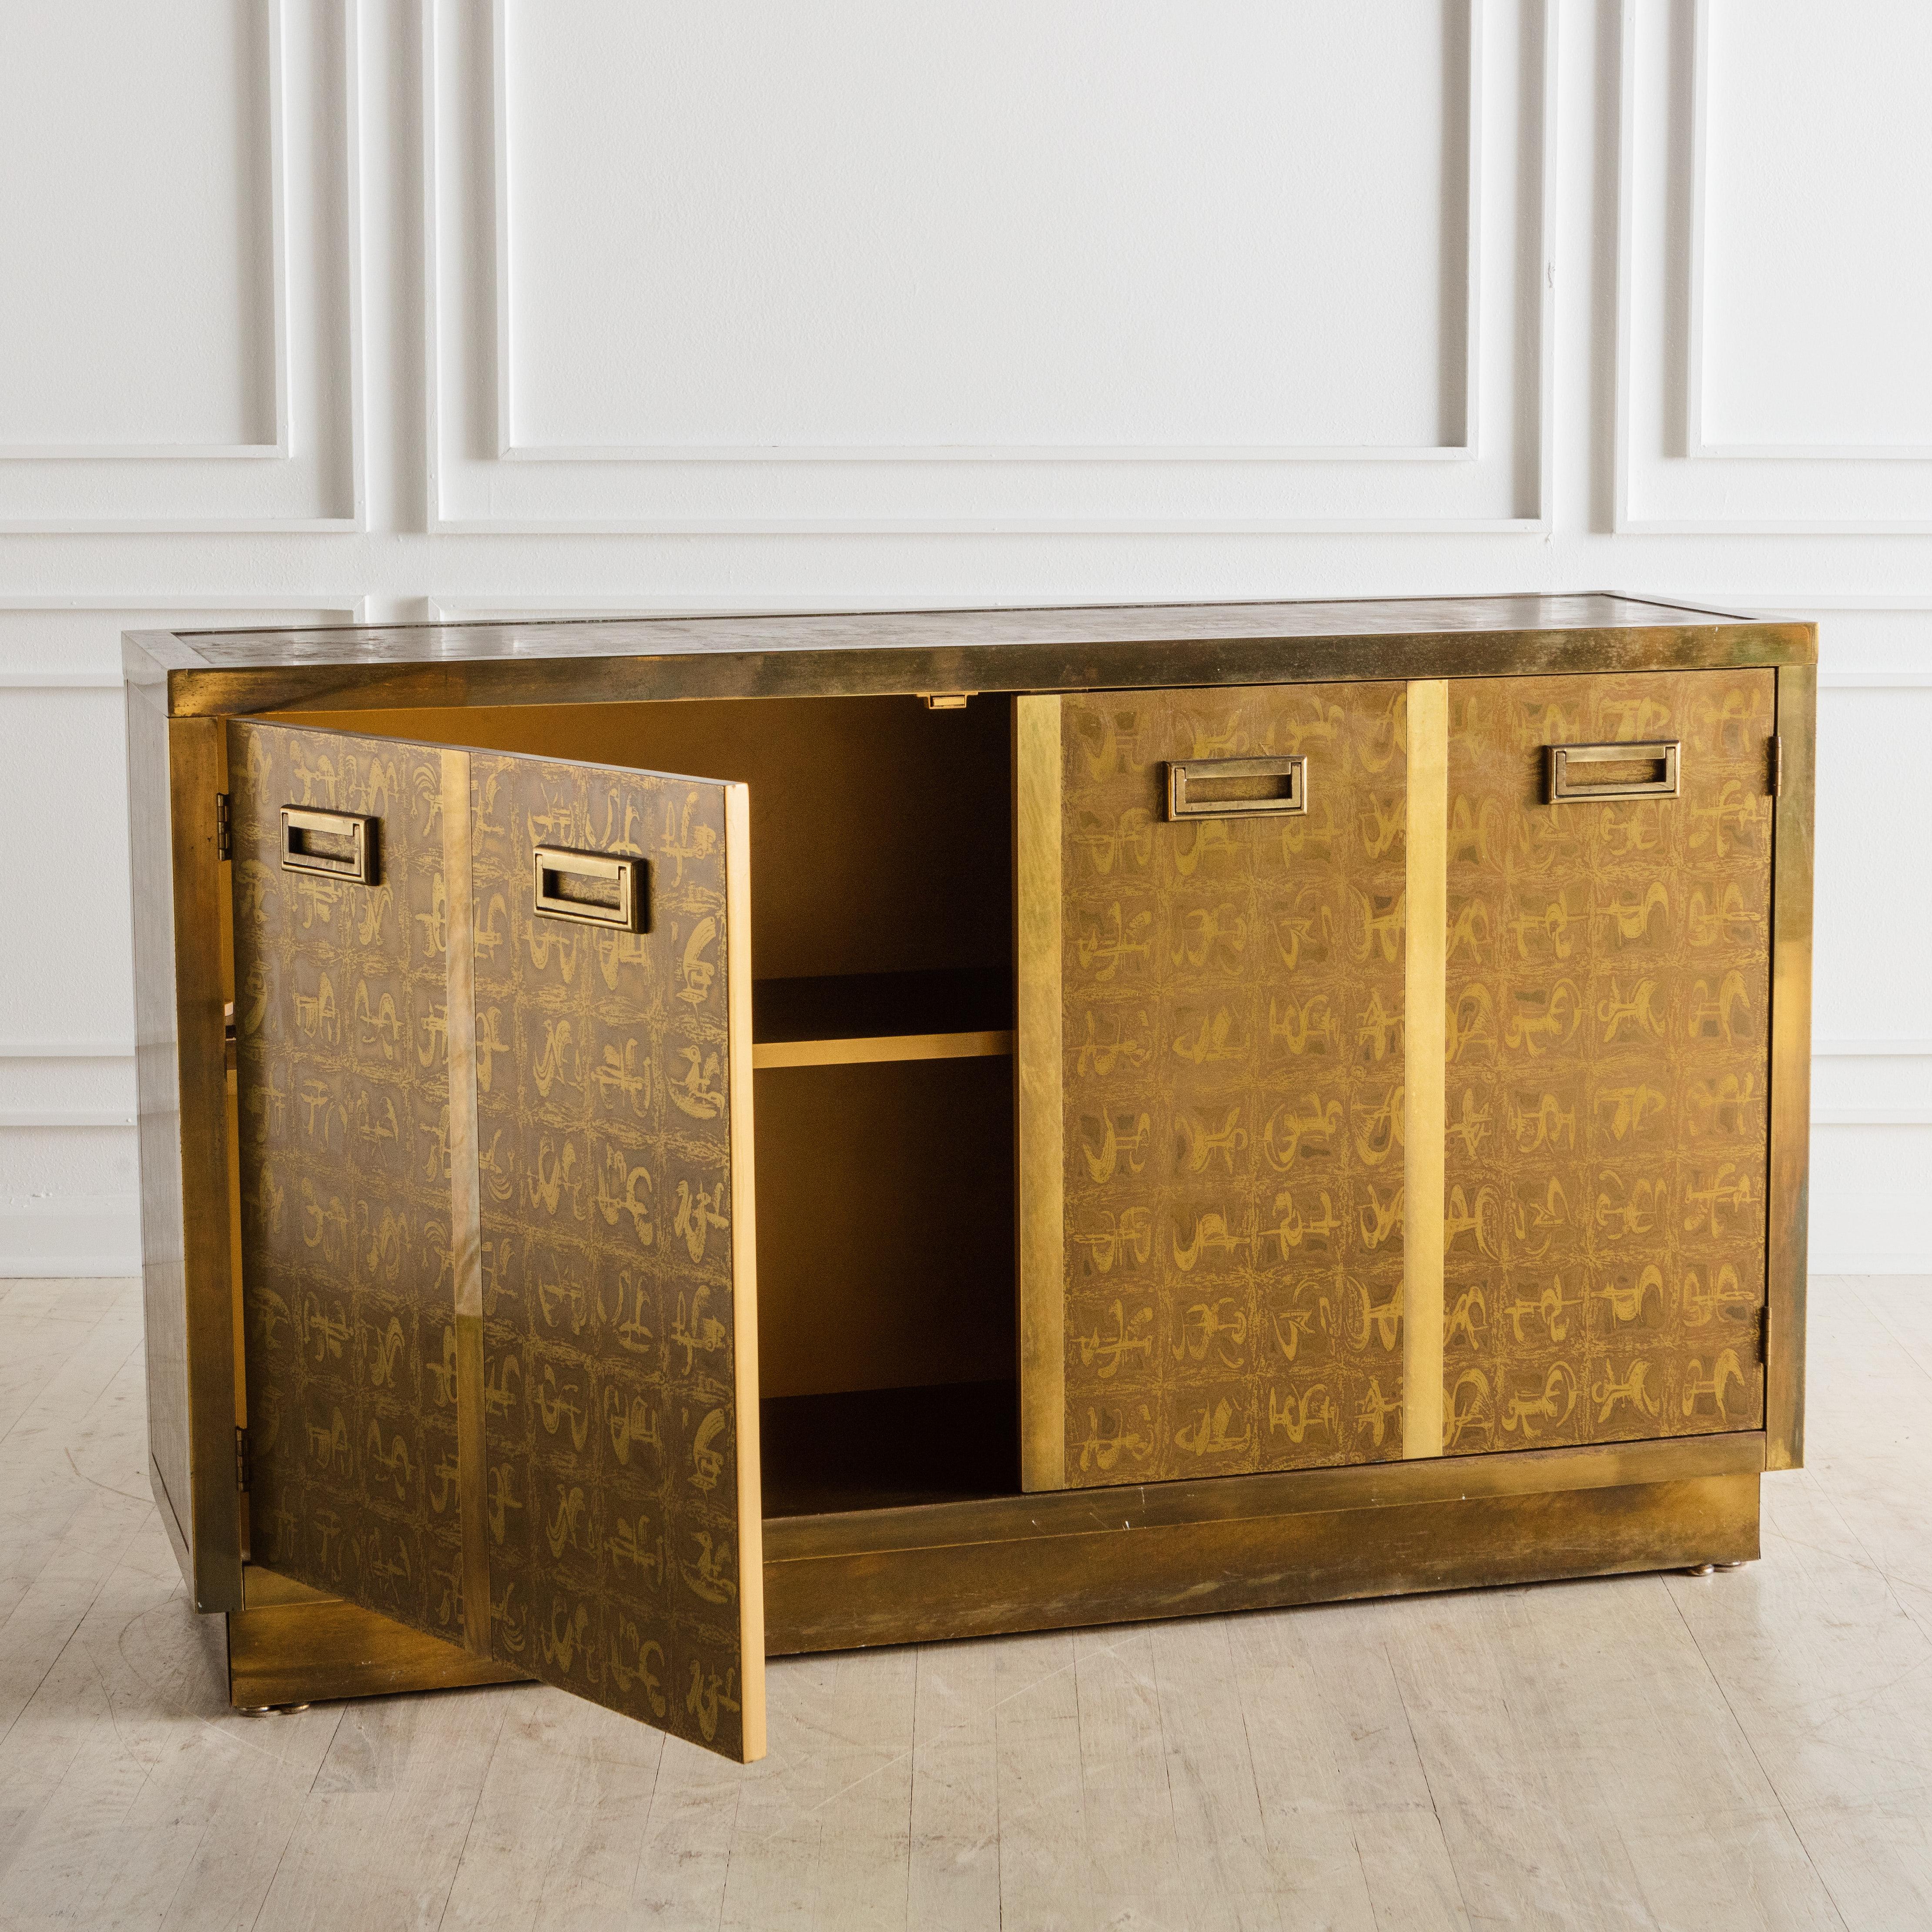 A statement piece designed by Berhard Rohne for the eponymous brand, Mastercraft. Featuring a gorgeous deep brass clad finish with repeating pattern created by the artist by etching the brass with acid. The cabinet doors open to reveal a single